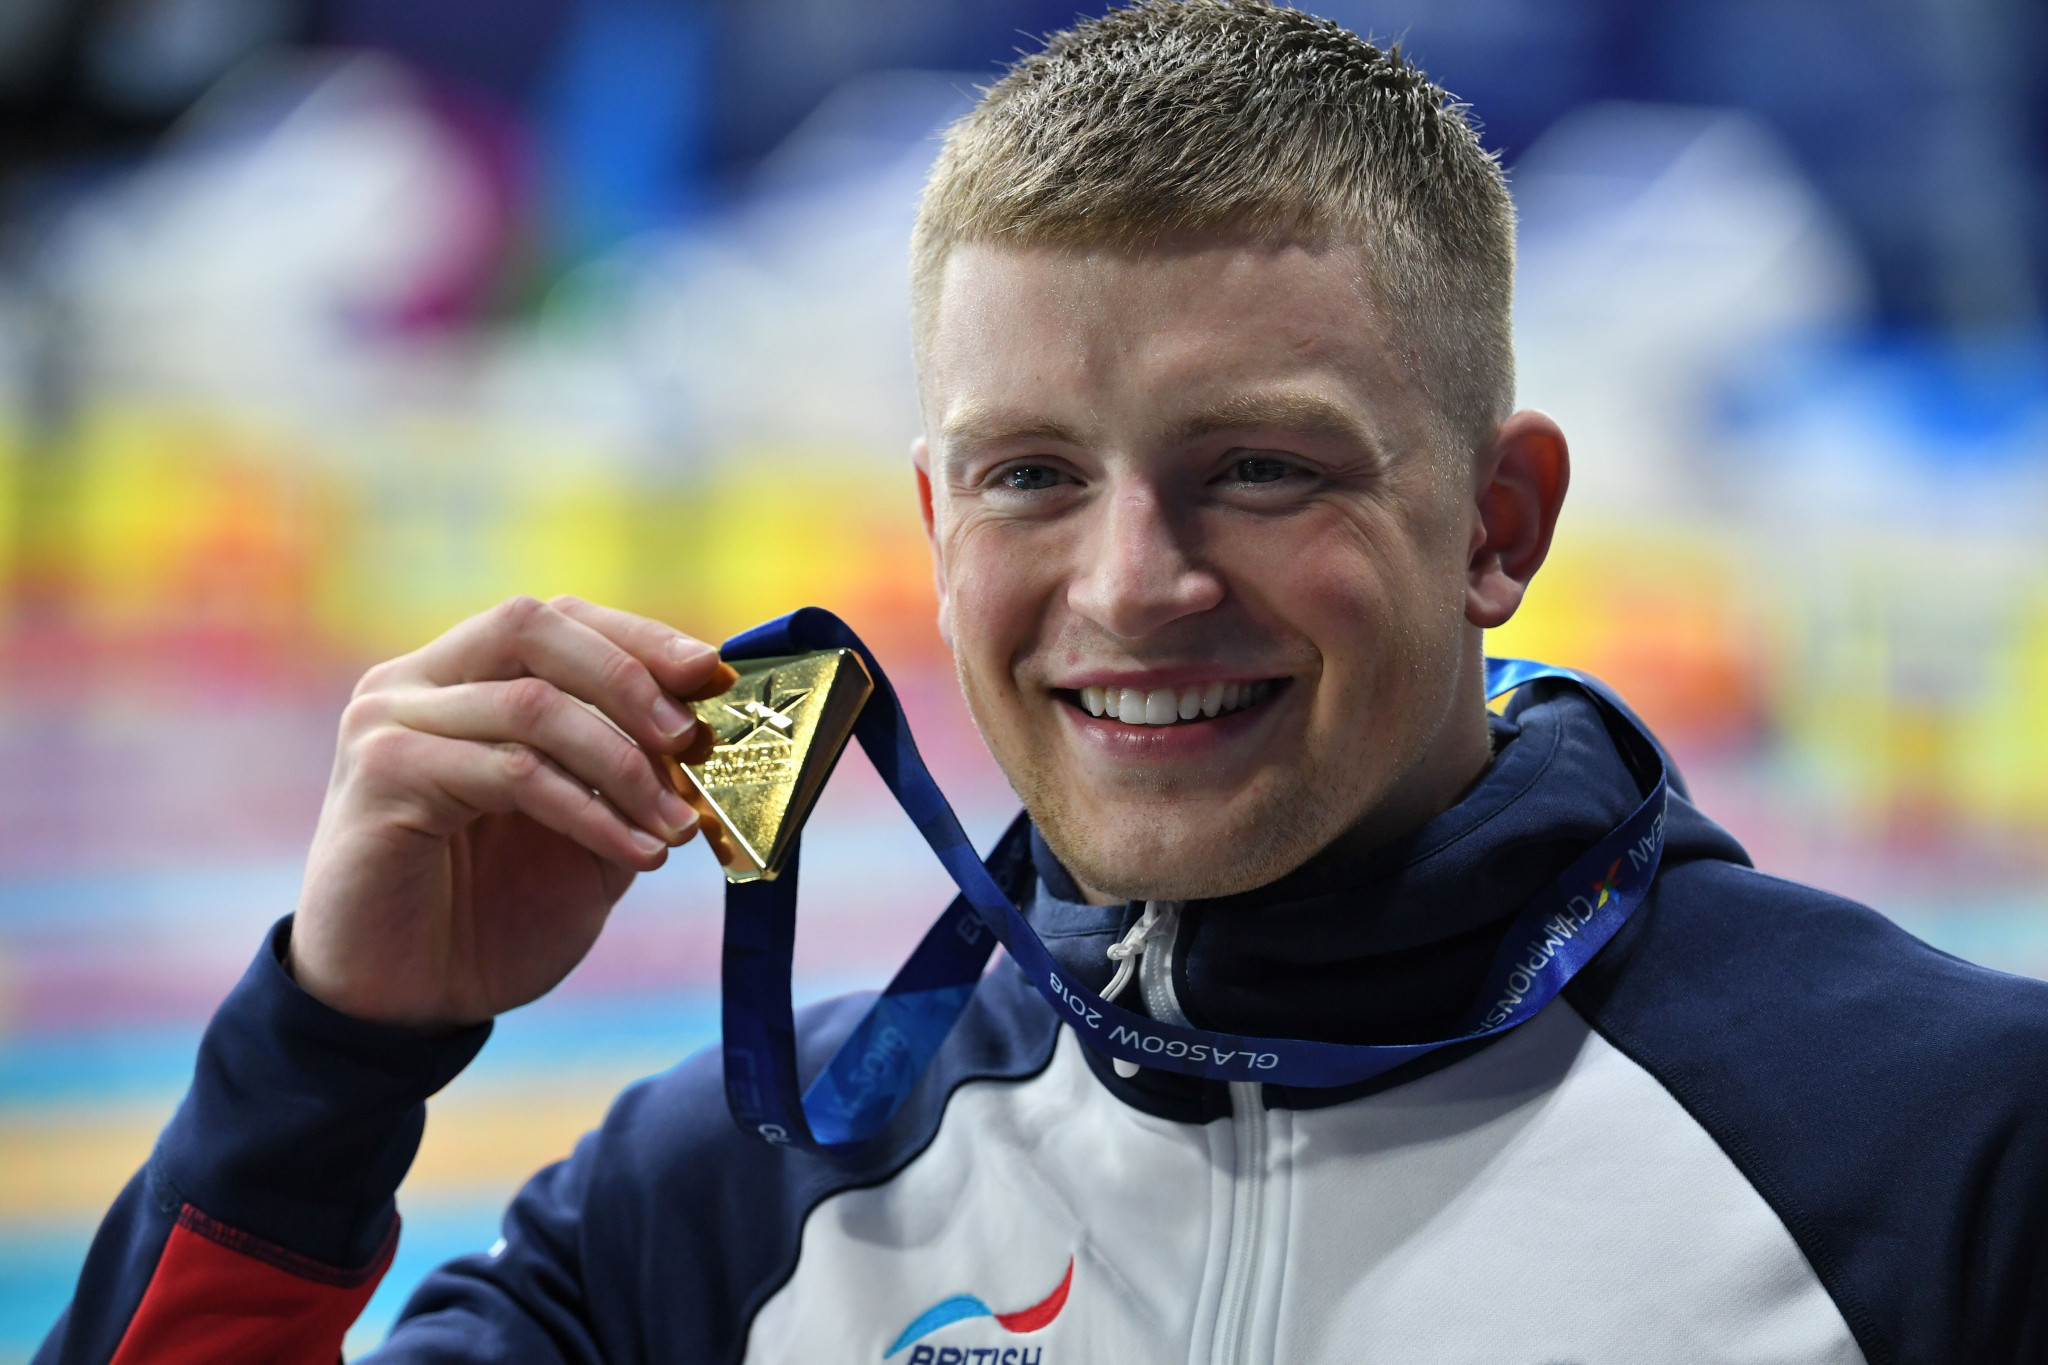 Adam Peaty's 100 metres breaststroke world record set at the Glasgow 2018 European Championships has been adjusted due to a problem with the race timing equipment ©Getty Images